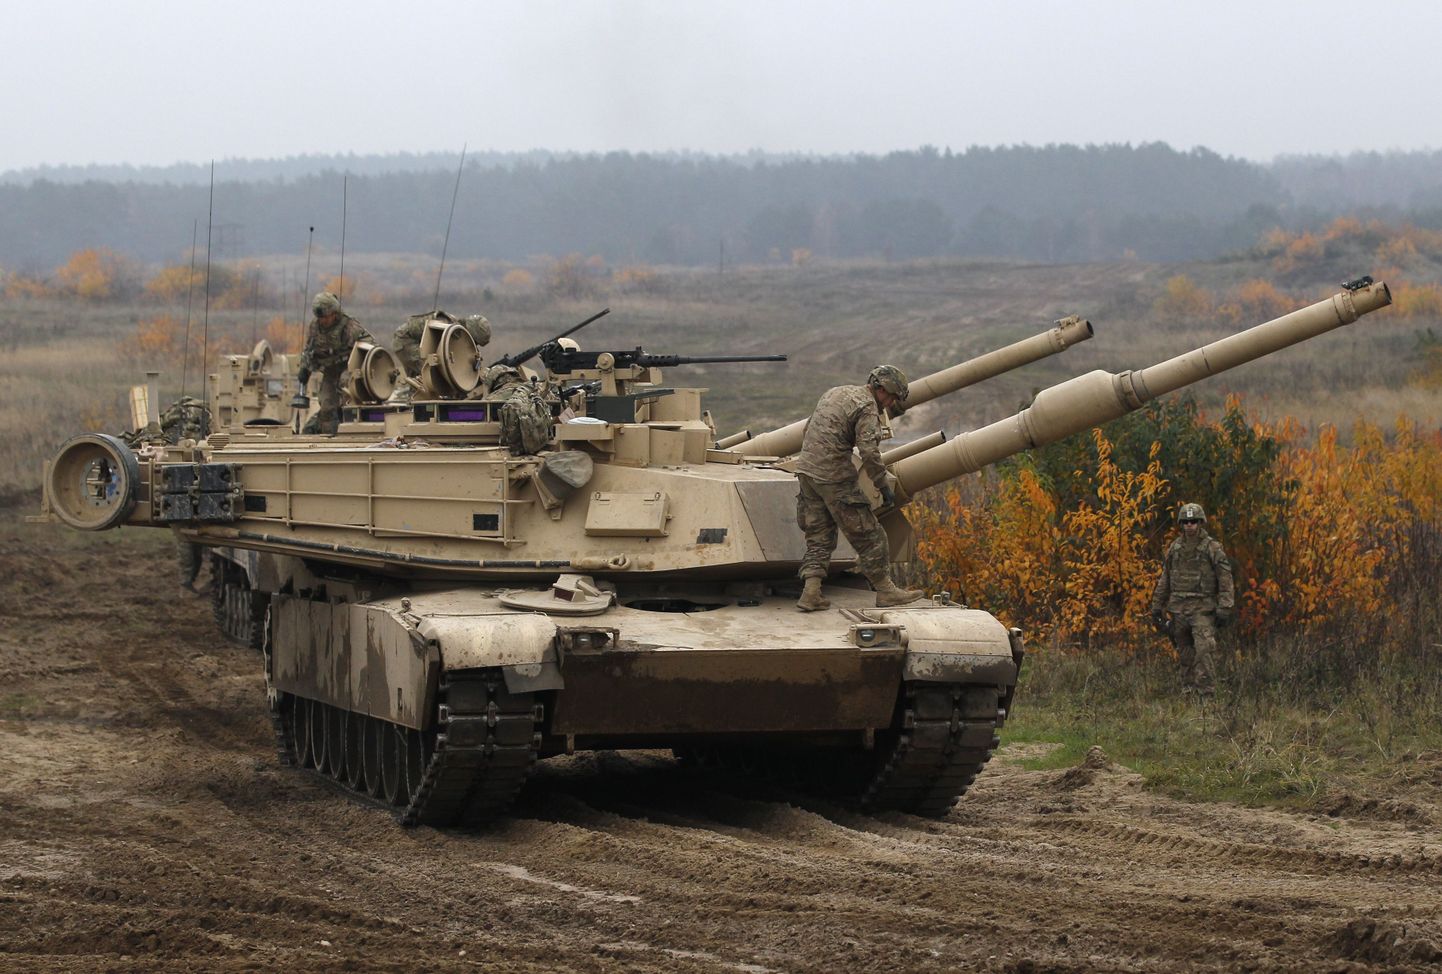 Members of the U.S. 1st Brigade Combat Team, 1st Cavalry Division disembark from an Abrams tank during a military exercise with Poland's 1st Mechanized Battalion of the 7th Coastal Defence Brigade near Drawsko-Pomorskie November 13, 2014. REUTERS/Kacper Pempel (POLAND  - Tags: MILITARY POLITICS)